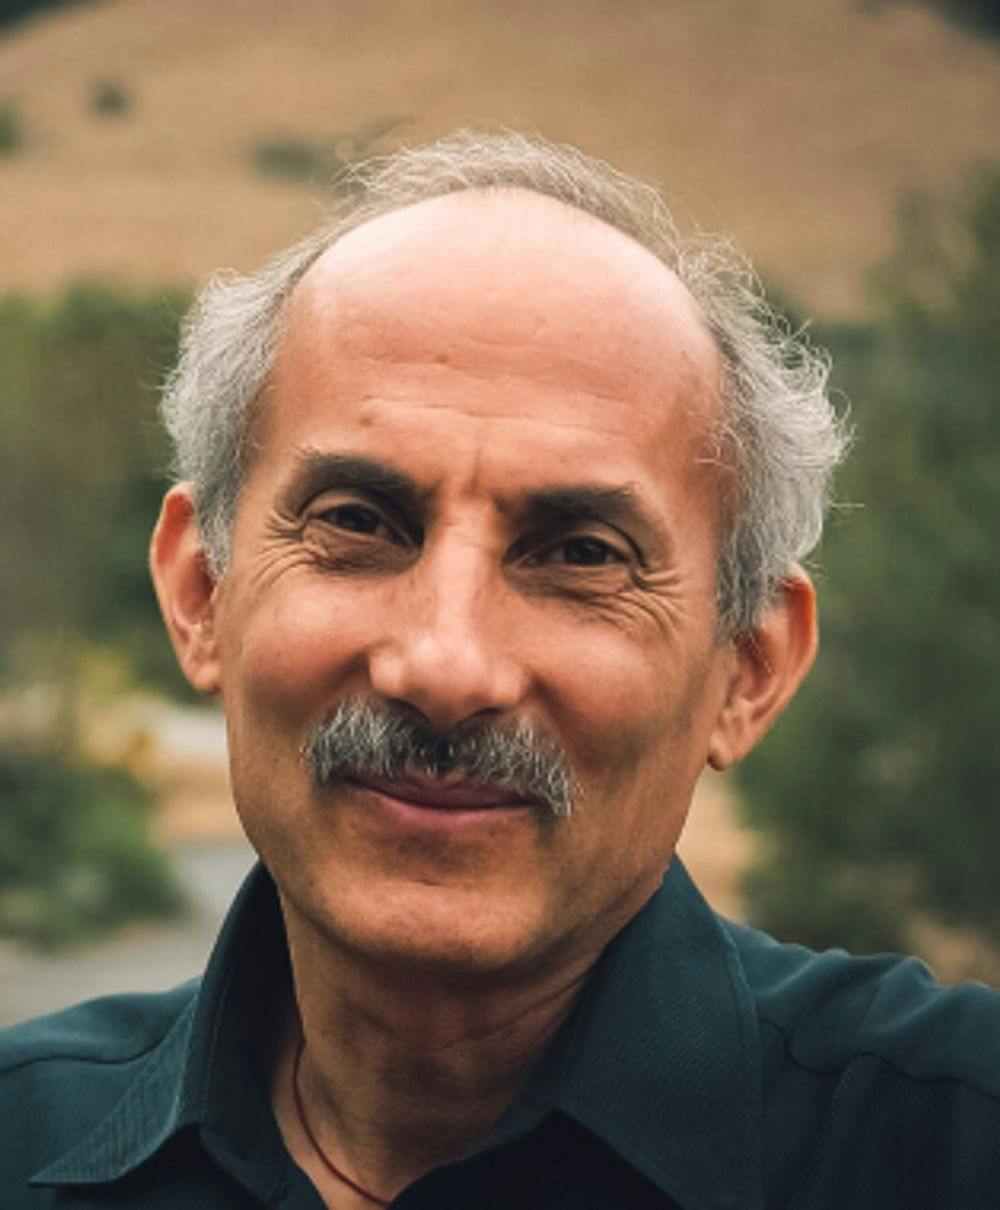 Jack Kornfield - Author, Buddhist Practitioner and one of the key teachers to introduce Buddhist mindfulness practice to the West.